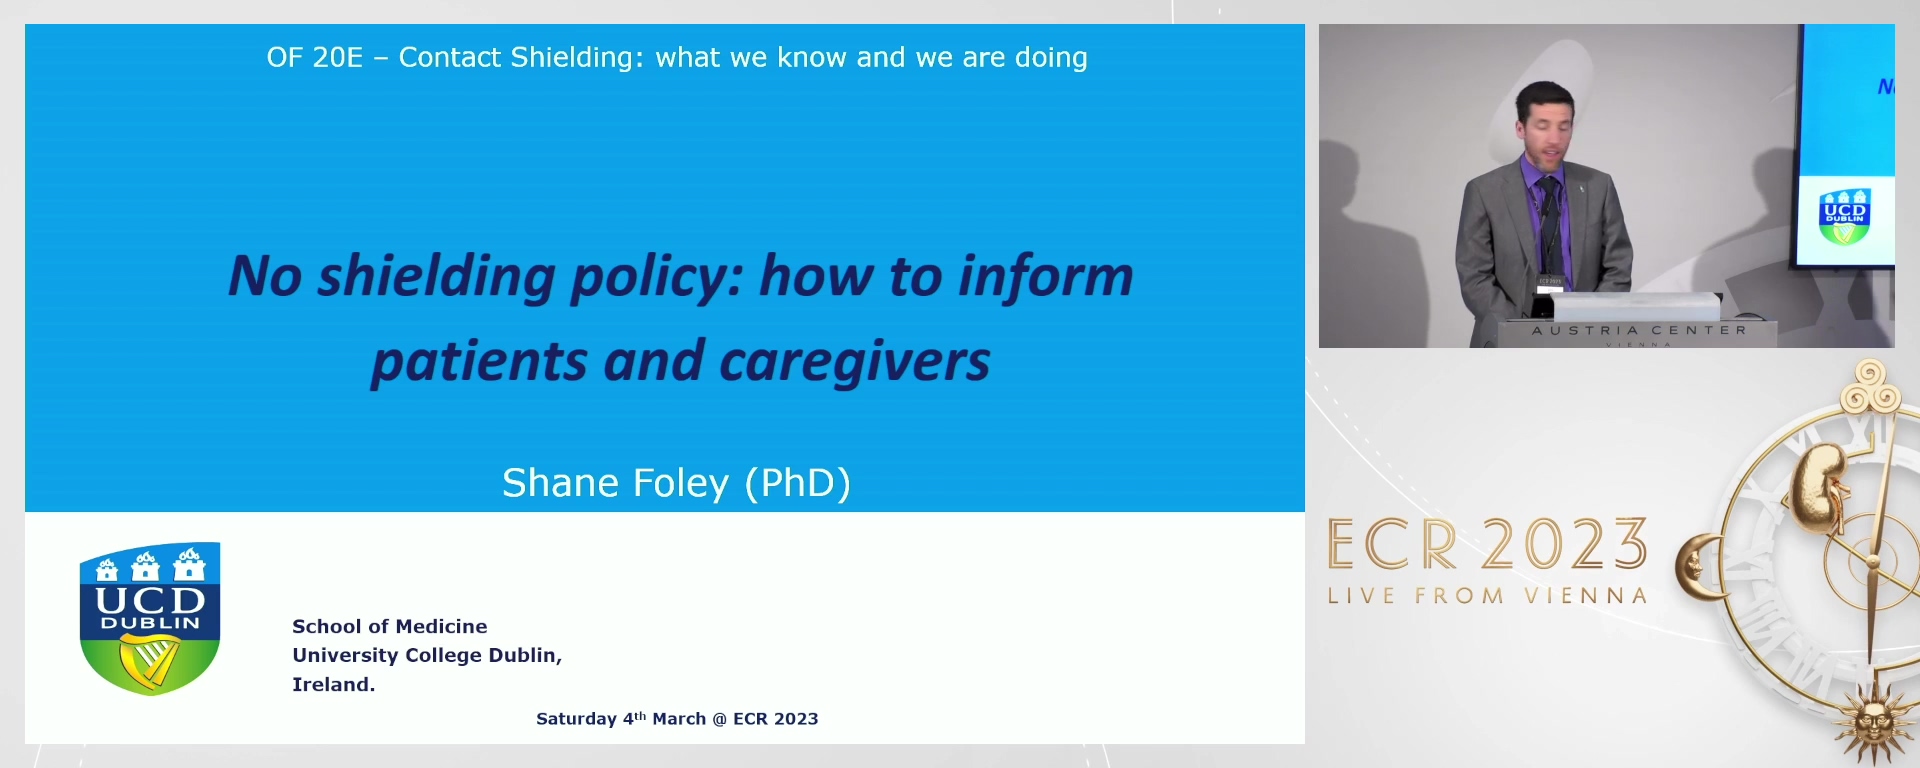 No-shielding policy: how to inform patients and caregivers